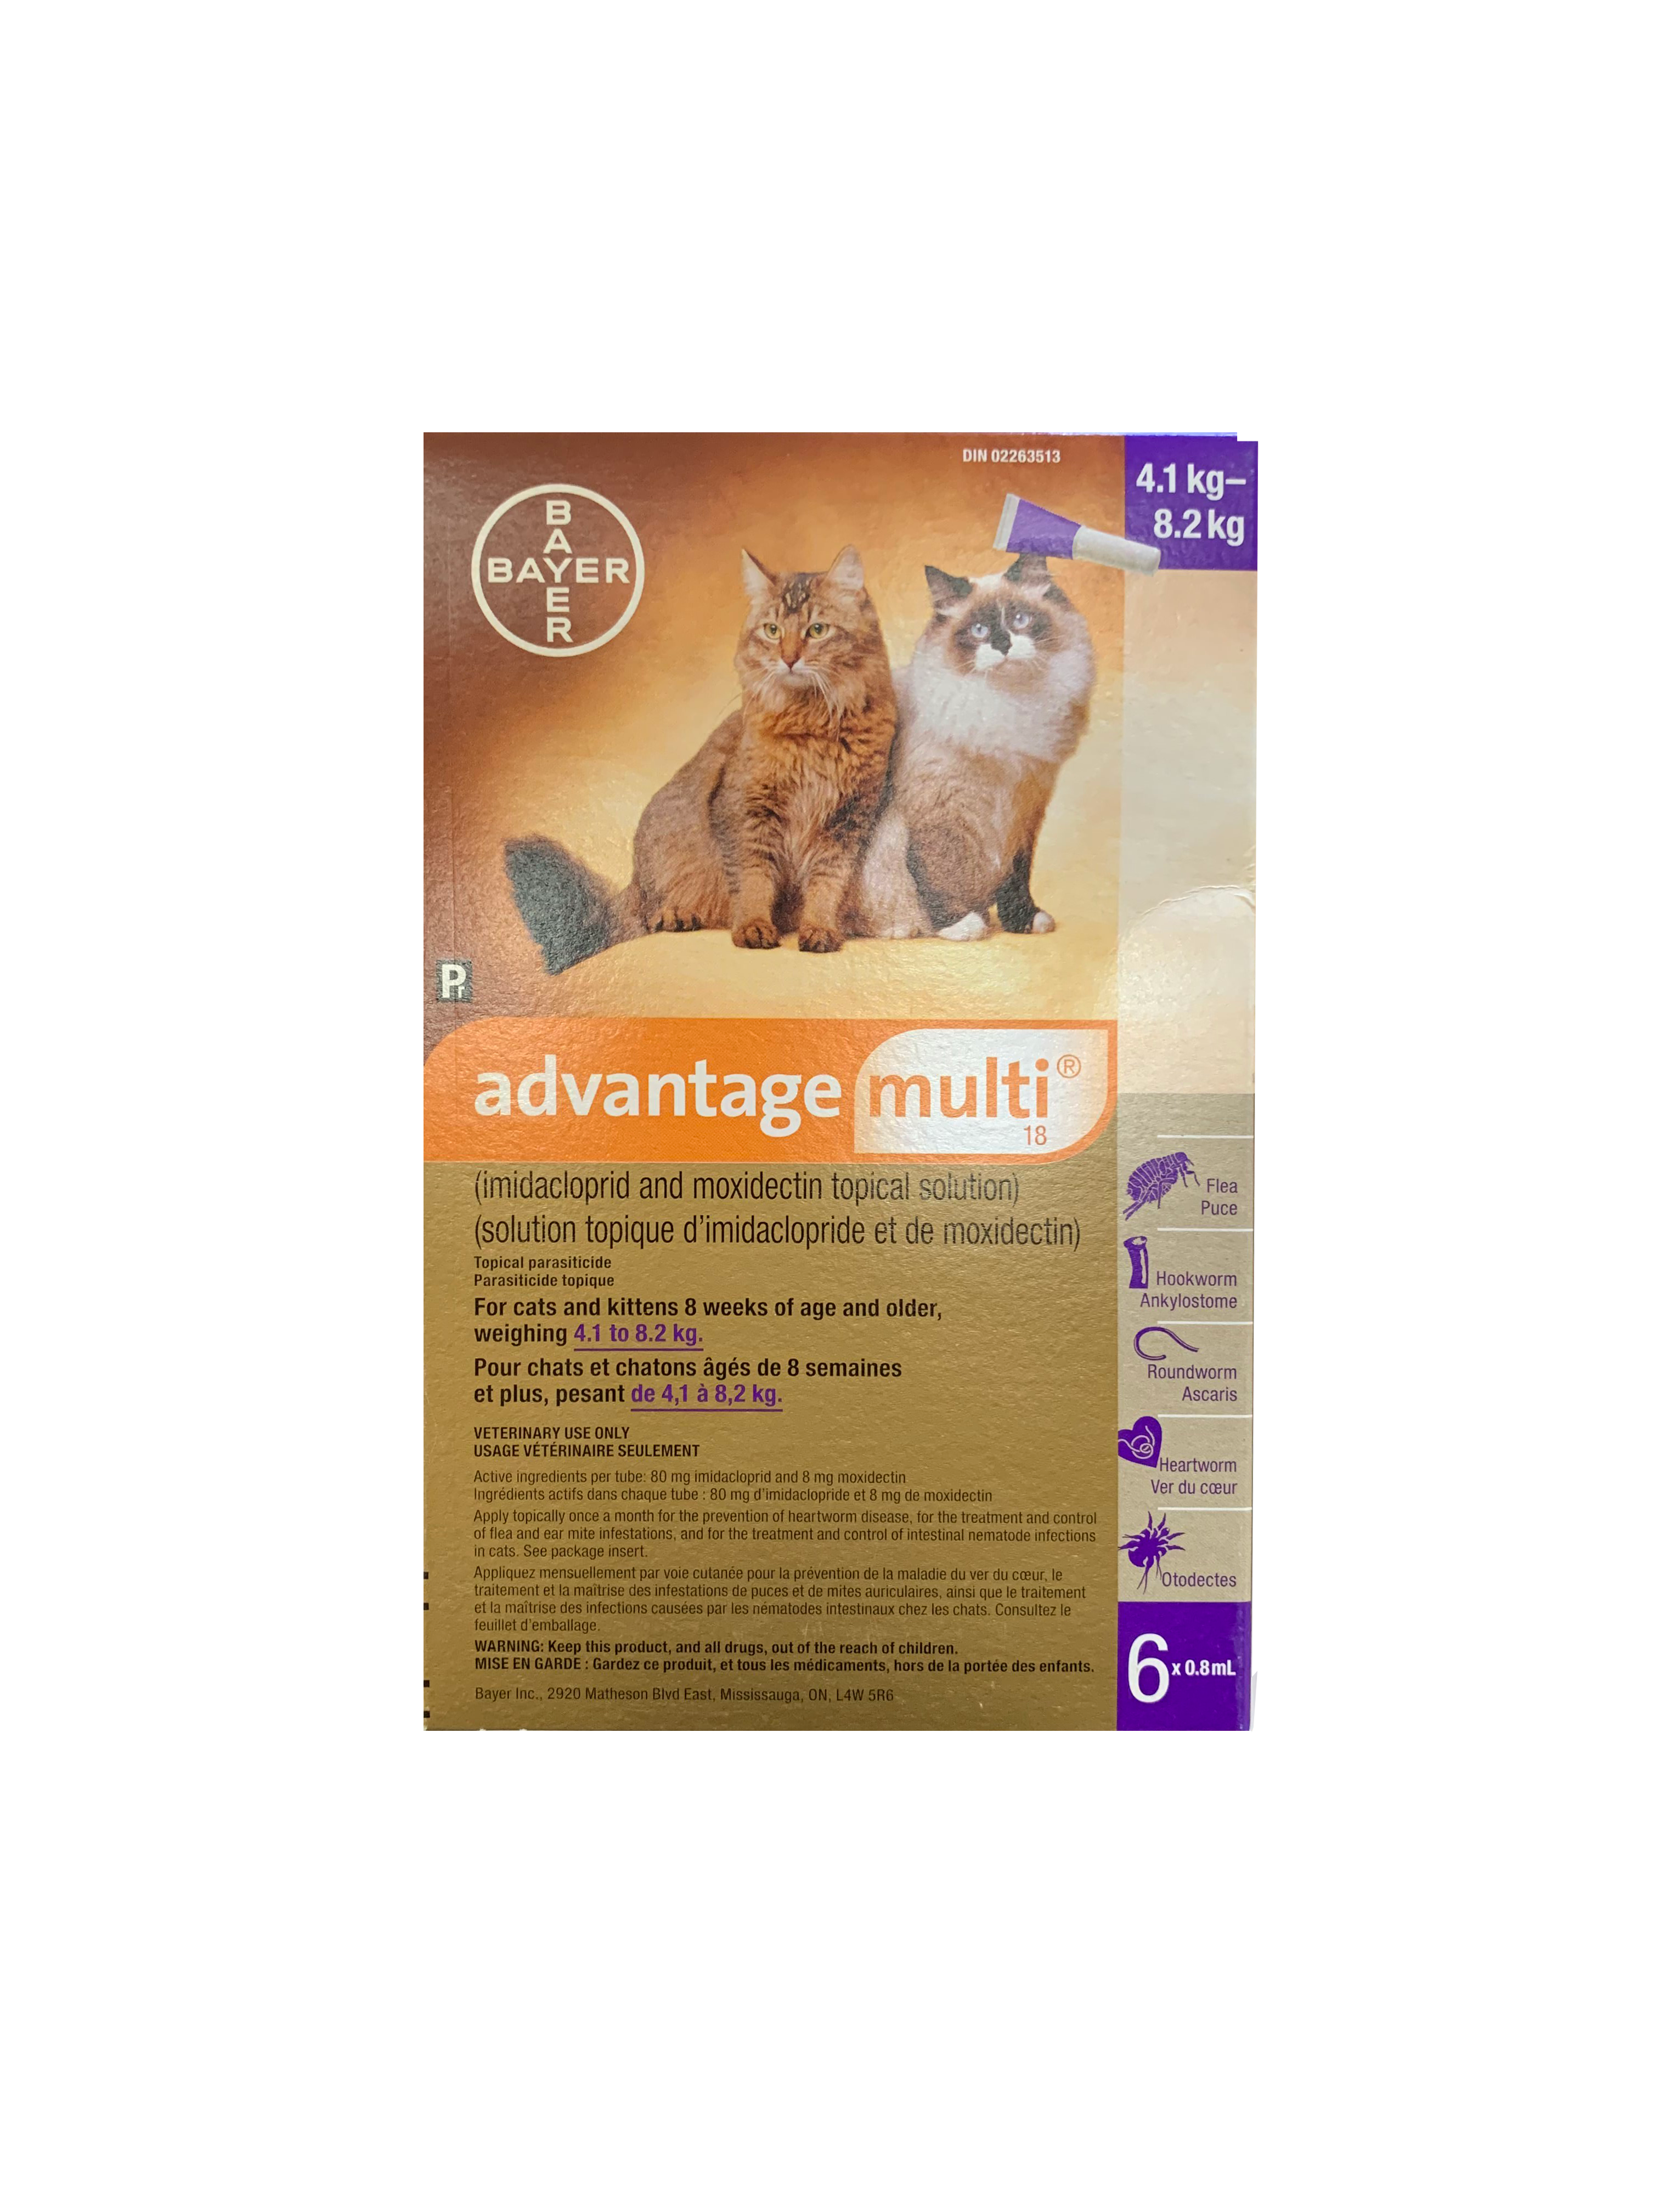 How Much Is Advantage Multi For Cats